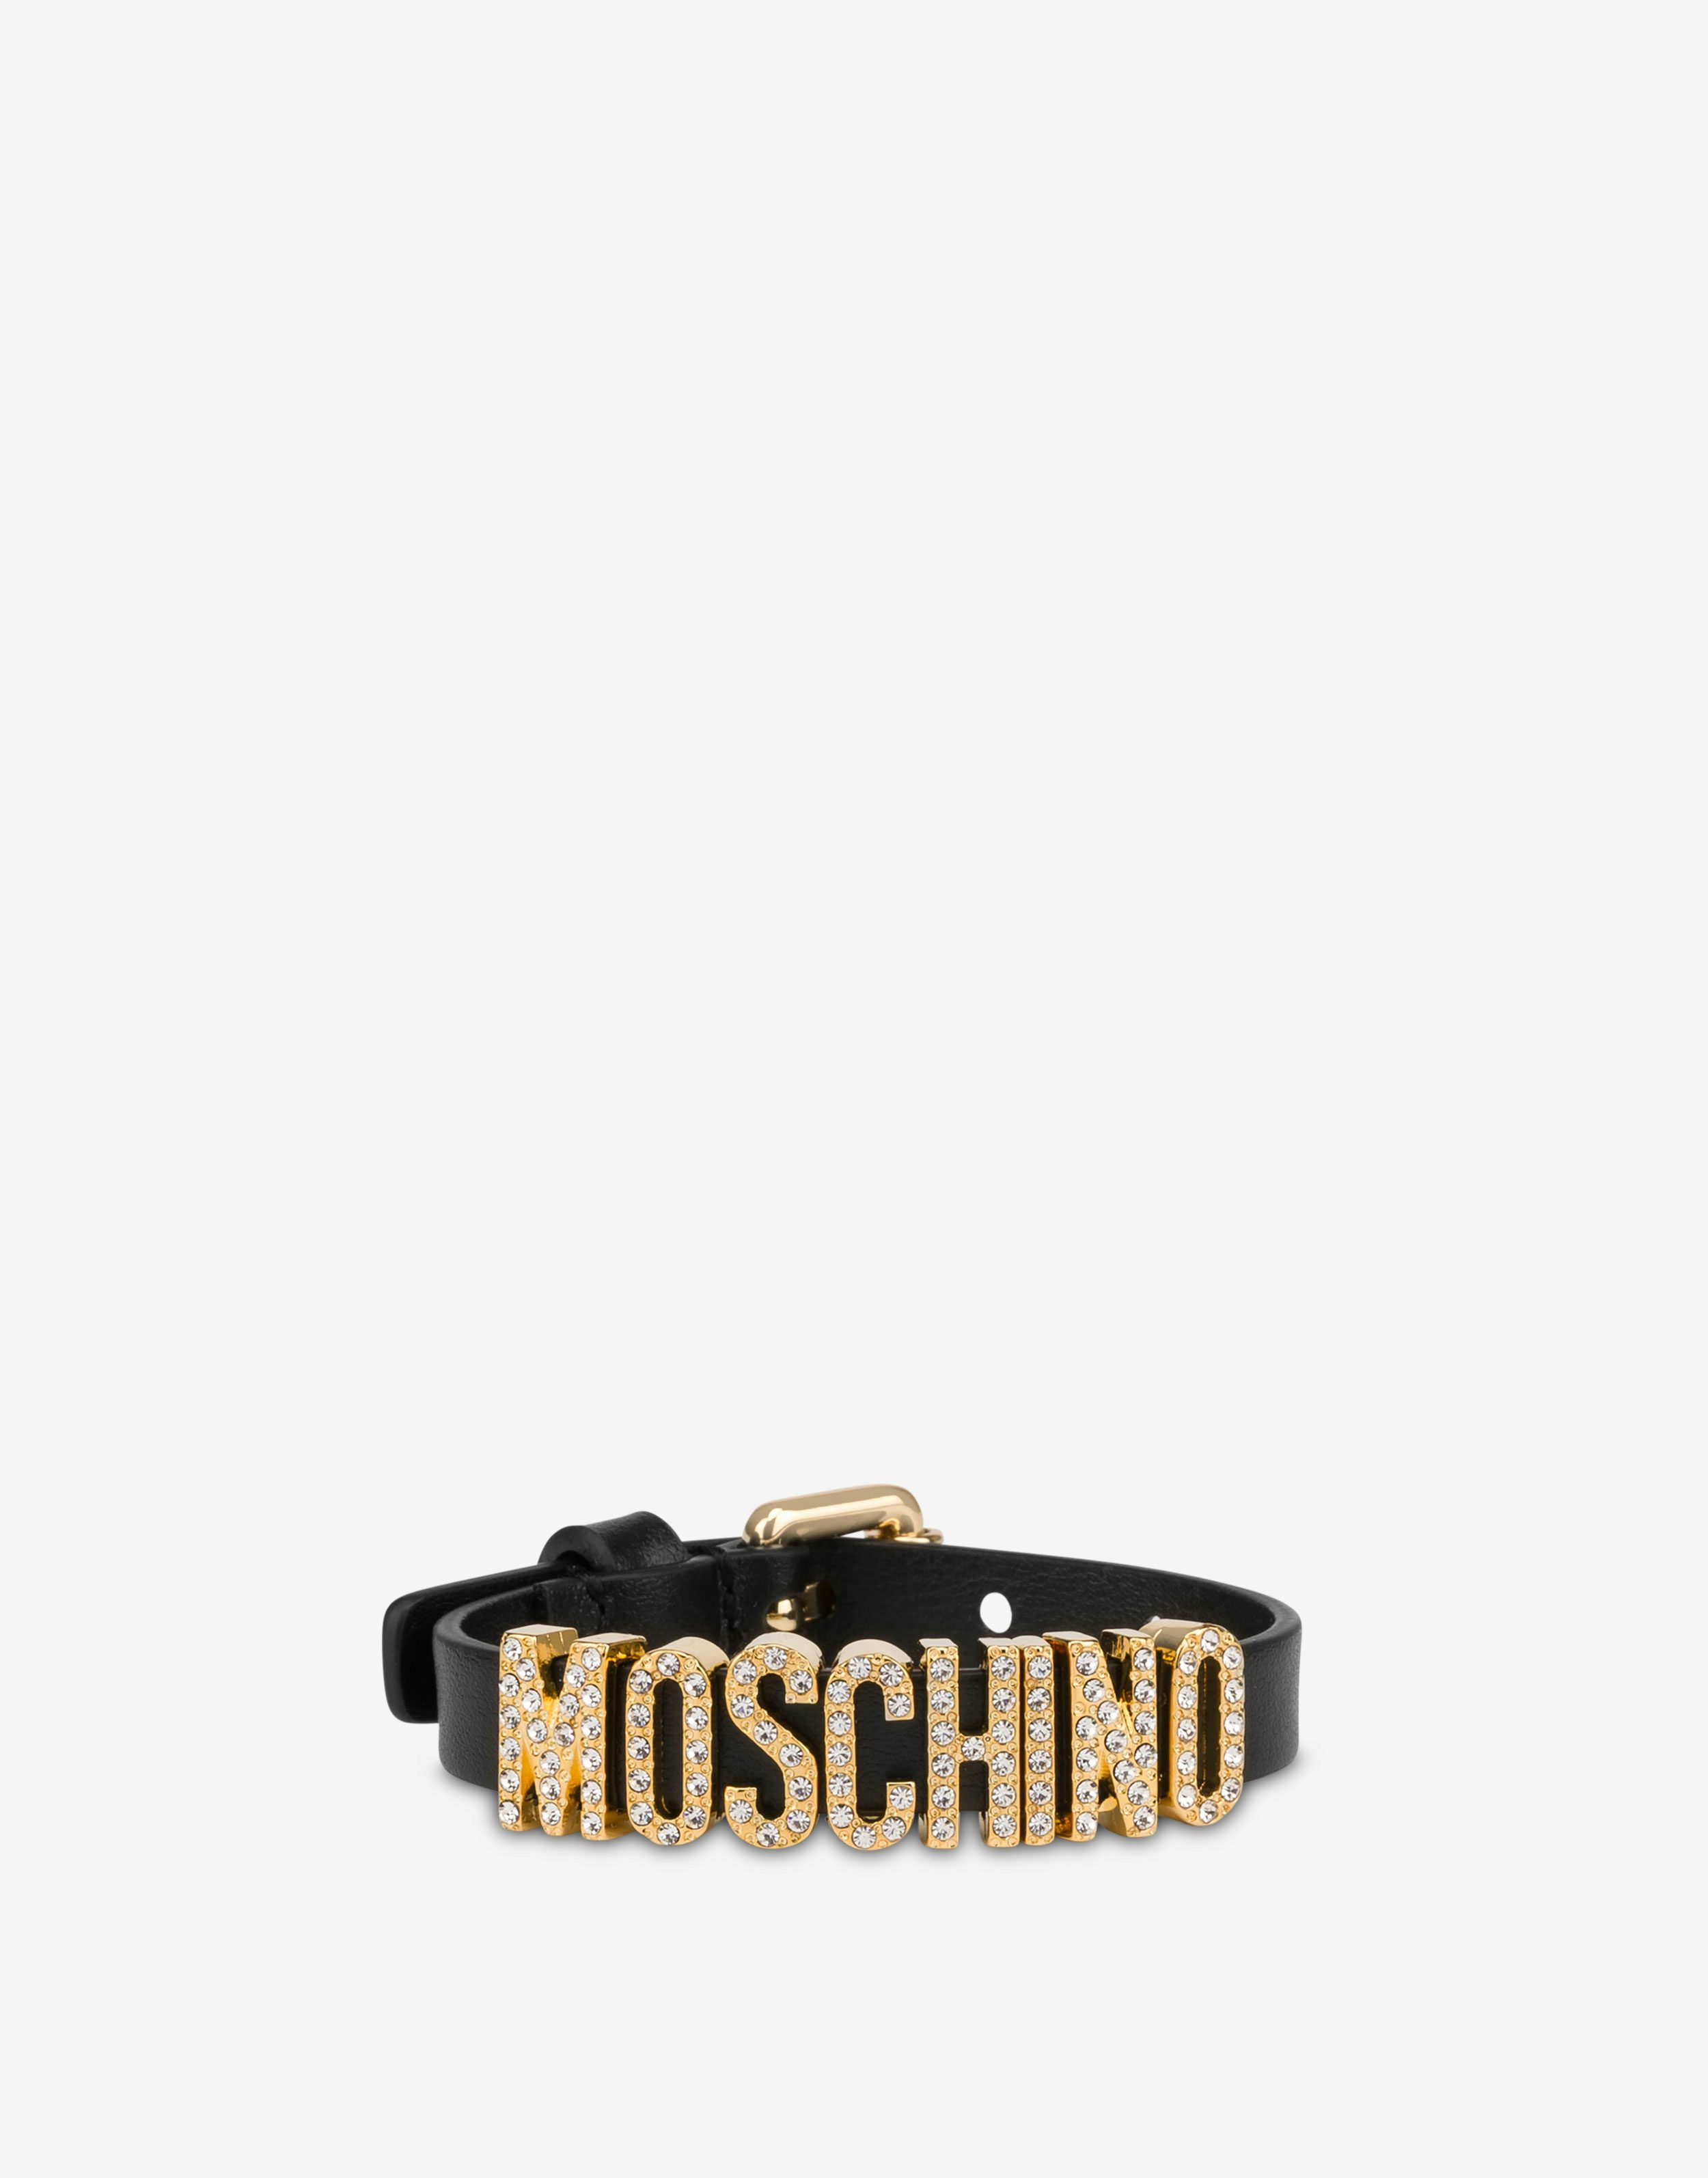 Moschino ジュエリー for レディース - Official Store